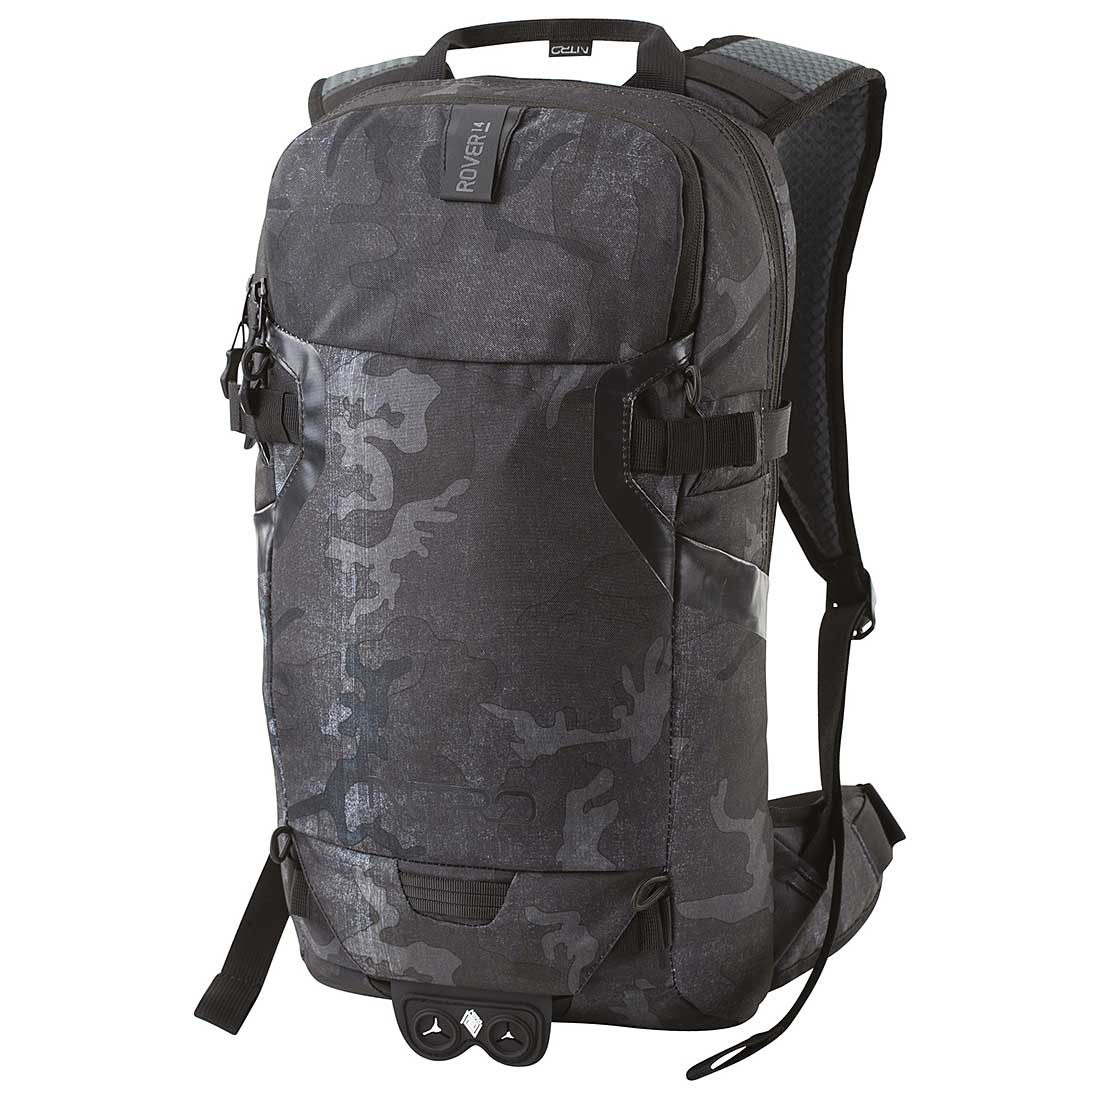 Outlet-Sonderverkauf Nitro Backpack 14 Forged Camo Rover